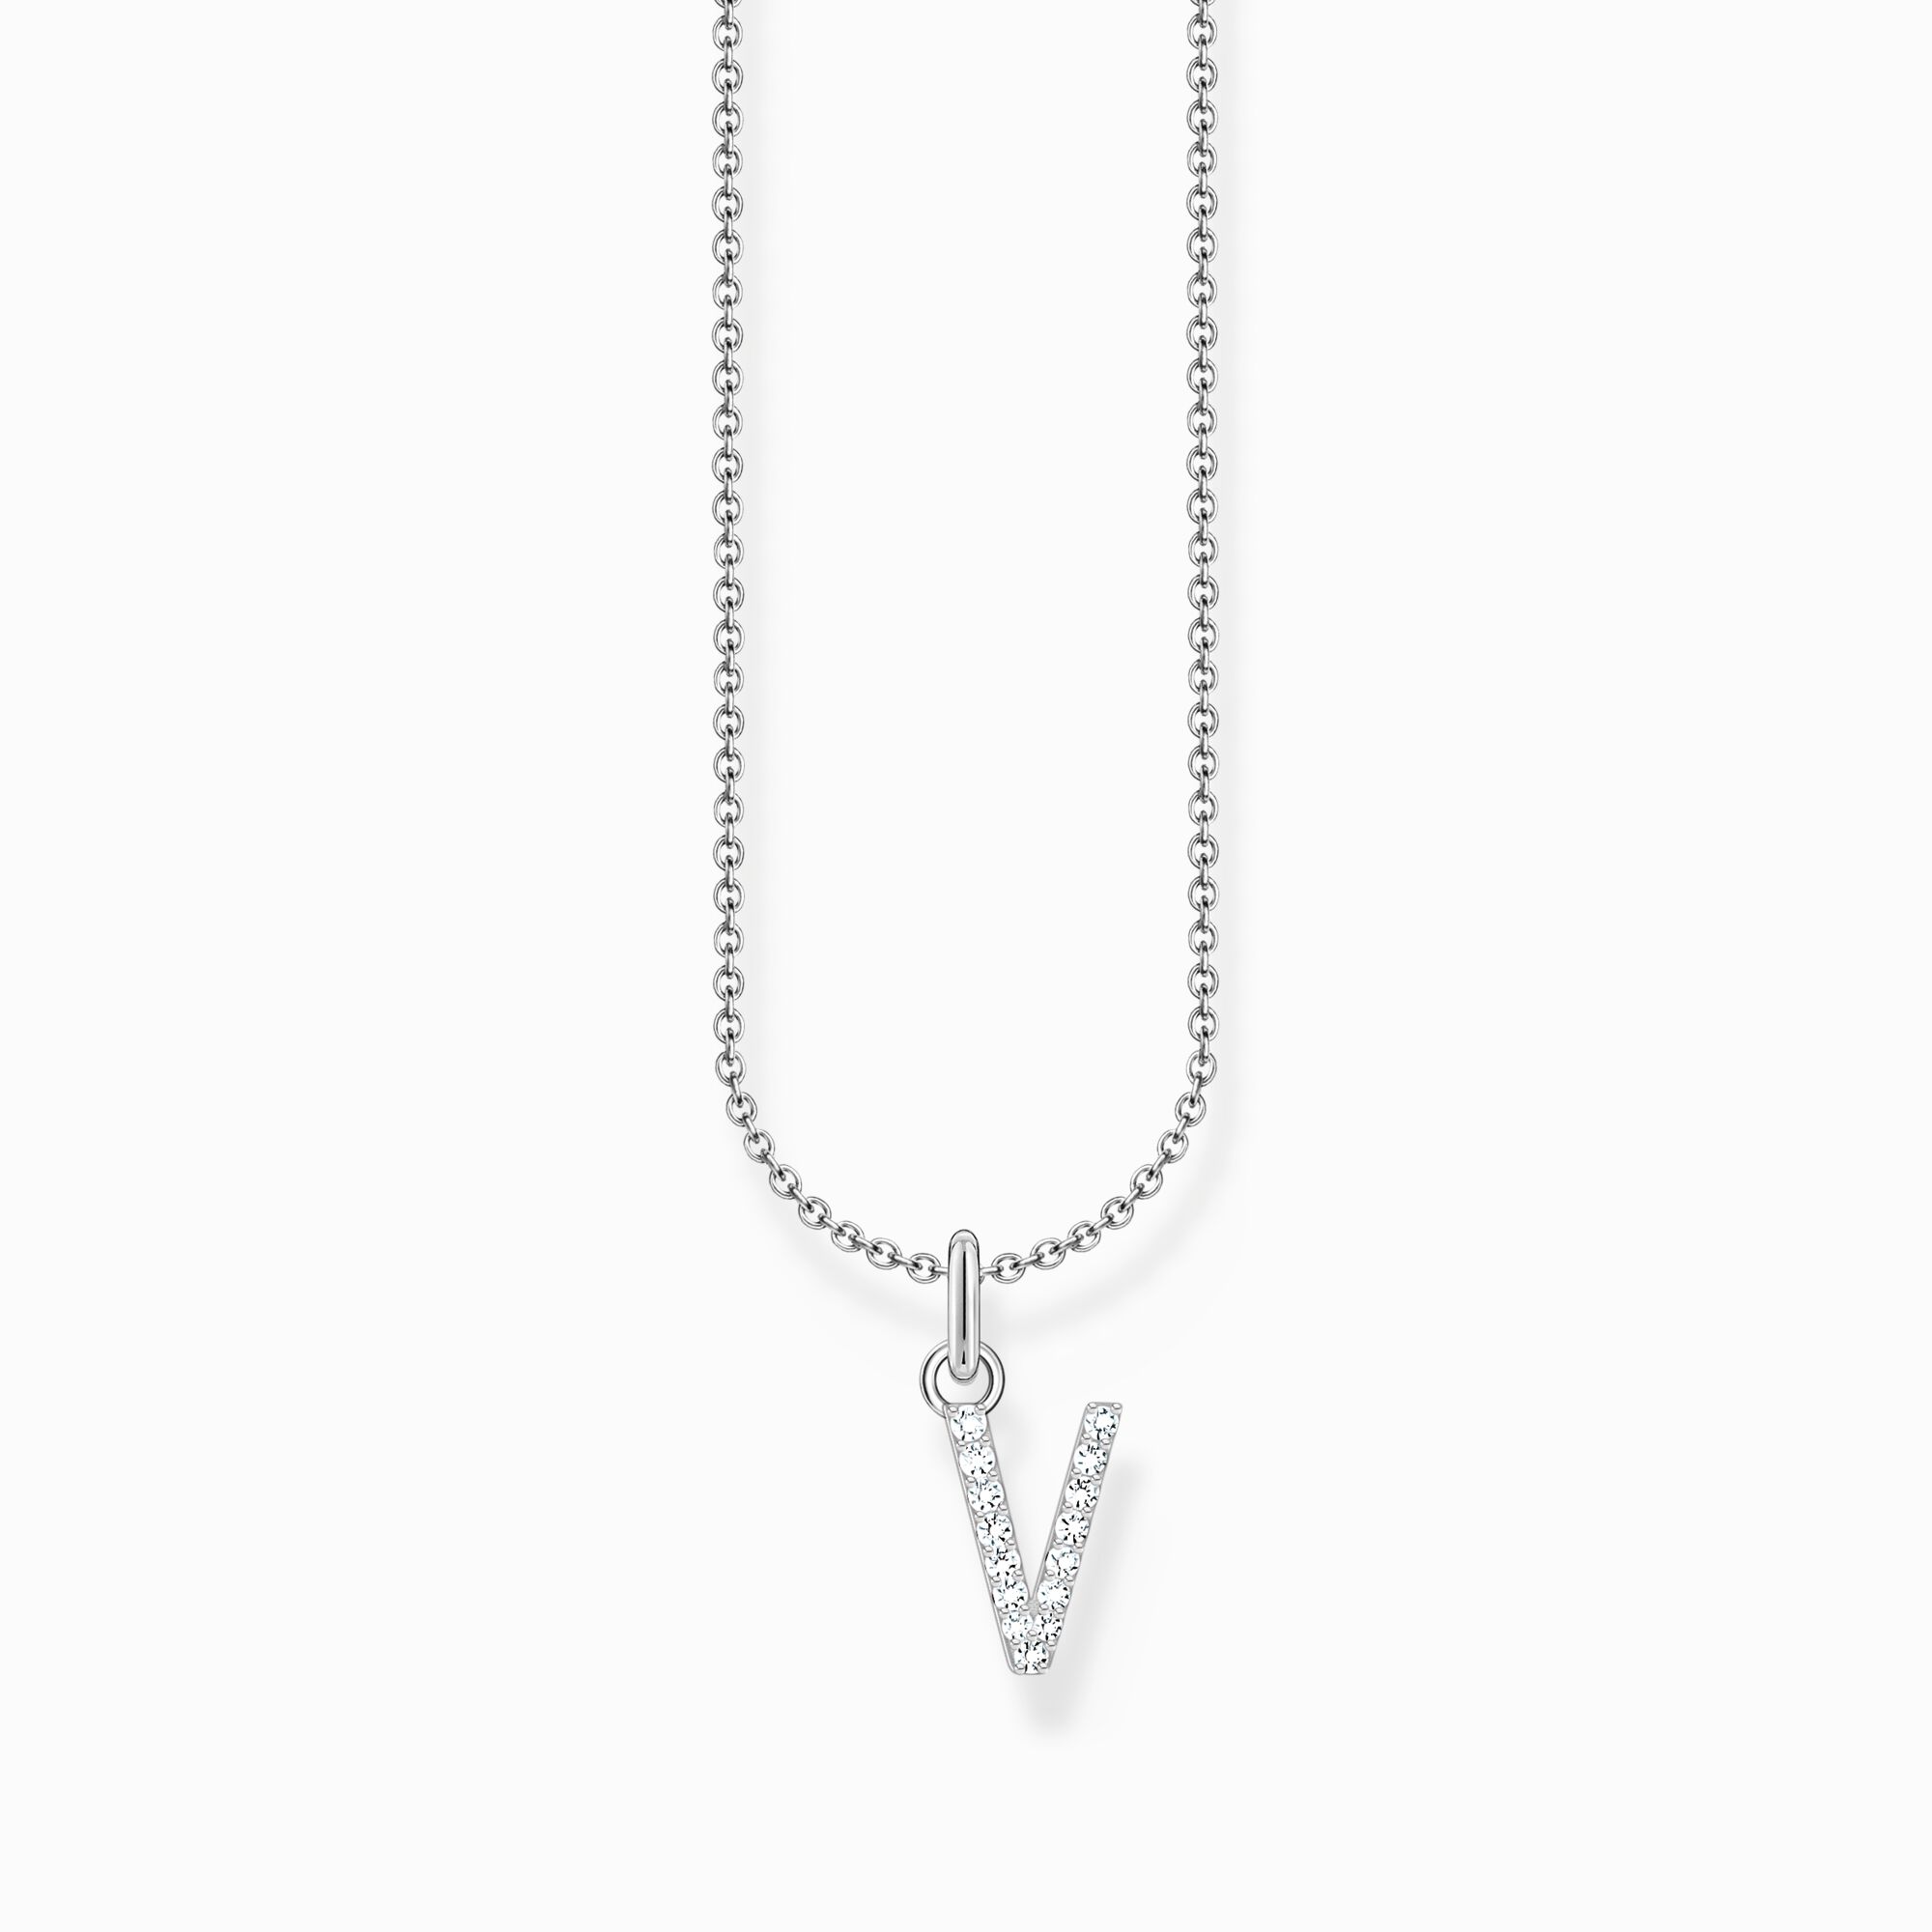 Silver necklace with letter pendant V and white zirconia from the Charming Collection collection in the THOMAS SABO online store